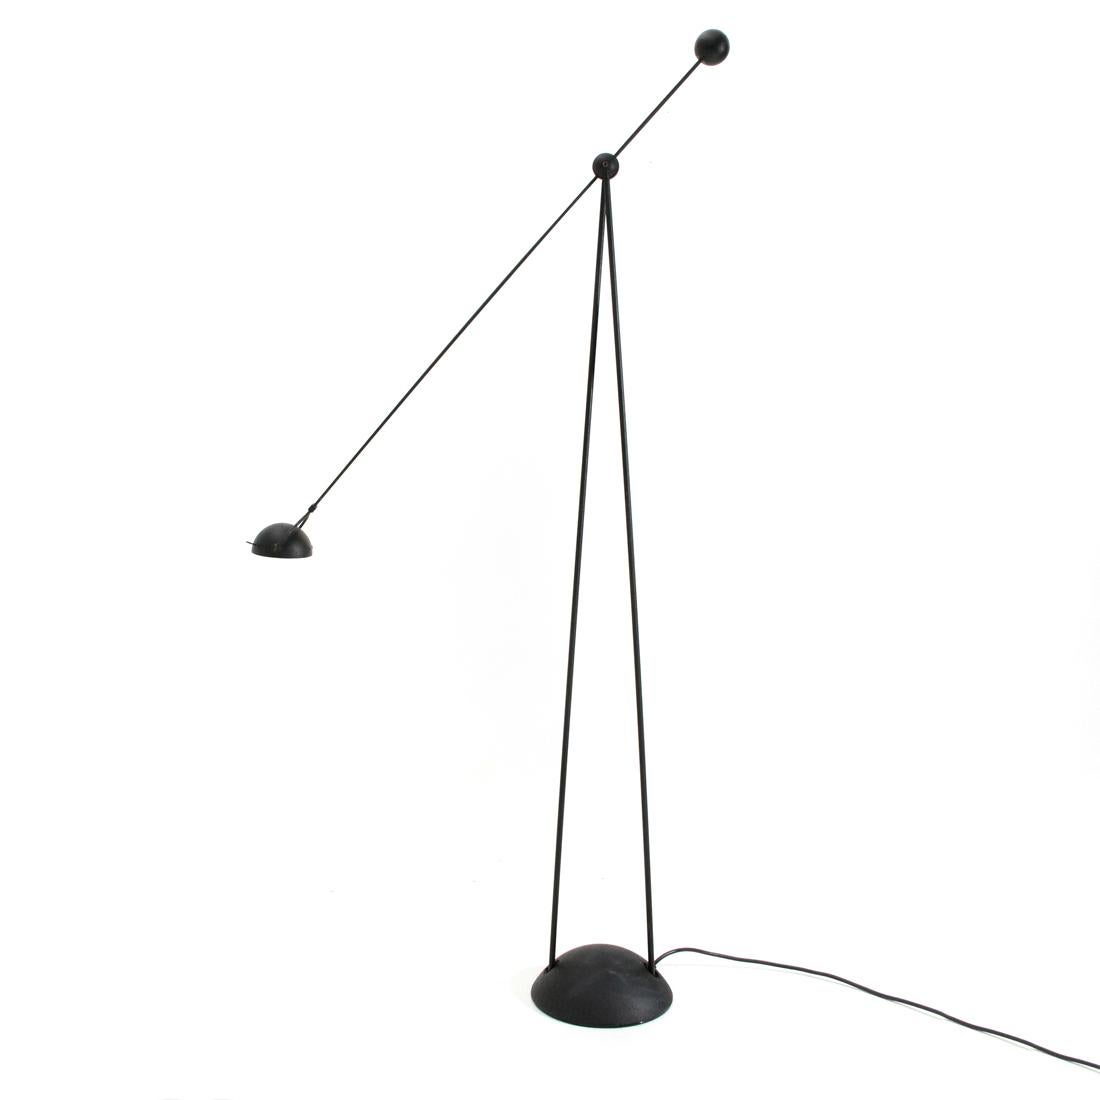 Lamp produced in the 1980s by Stefano Cevoli based on a design by Paolo Francesco Piva.
Hemispherical base in black painted metal.
Double stem in black painted metal that intersects with another pivoting stem having a diffuser at one end and a